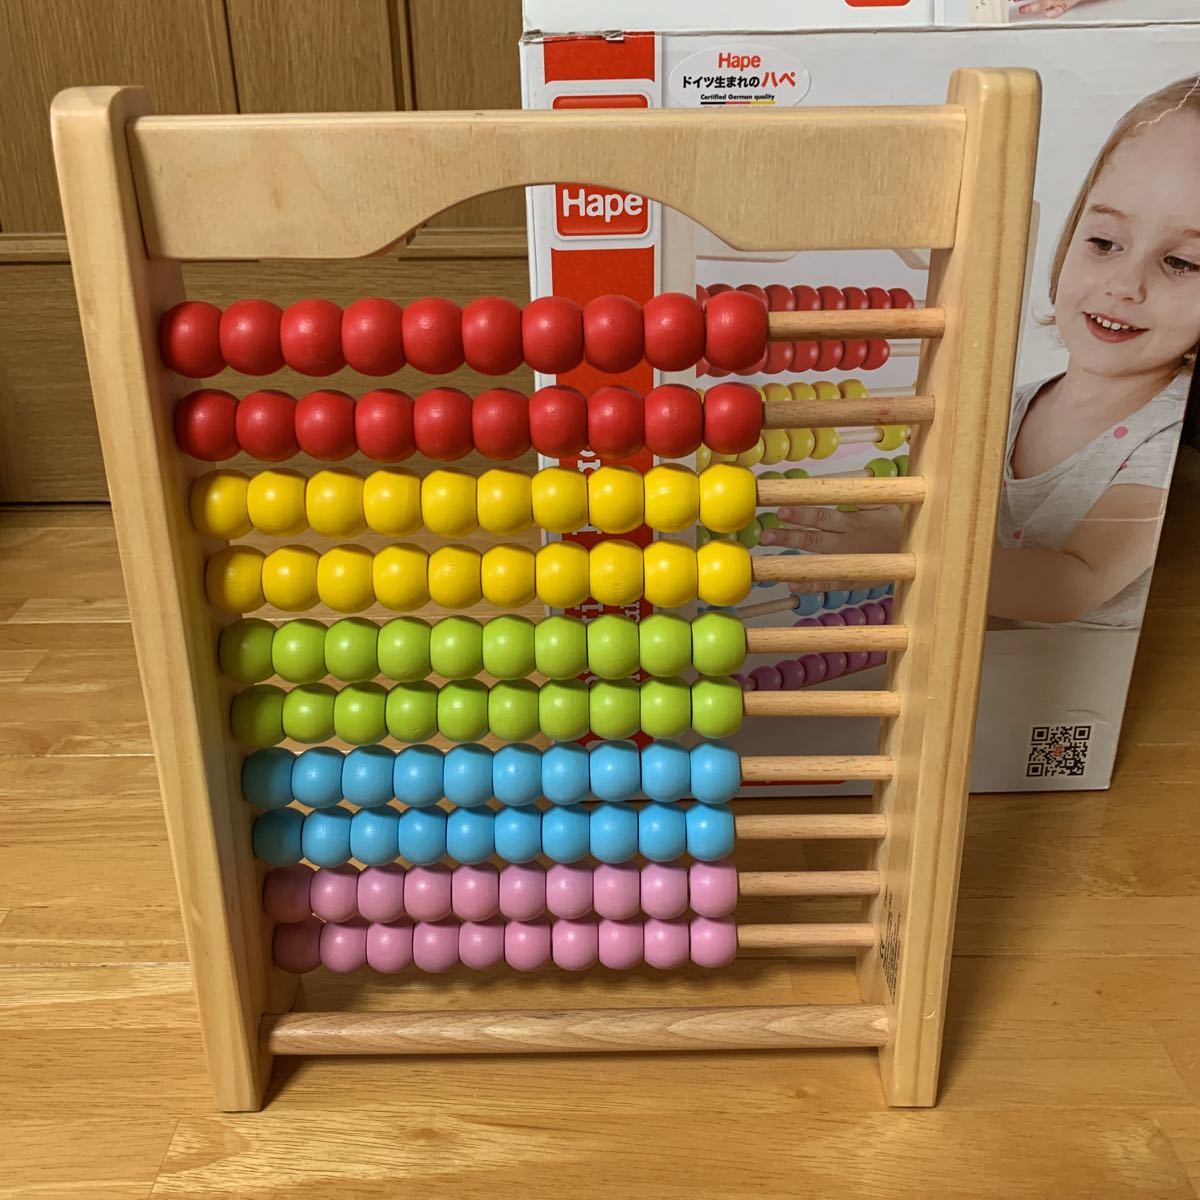 Hape is pe Germany wooden intellectual training toy colorful soroban Counting Beads Perlen zhlen object age 3 -years old from use item beautiful goods free shipping 